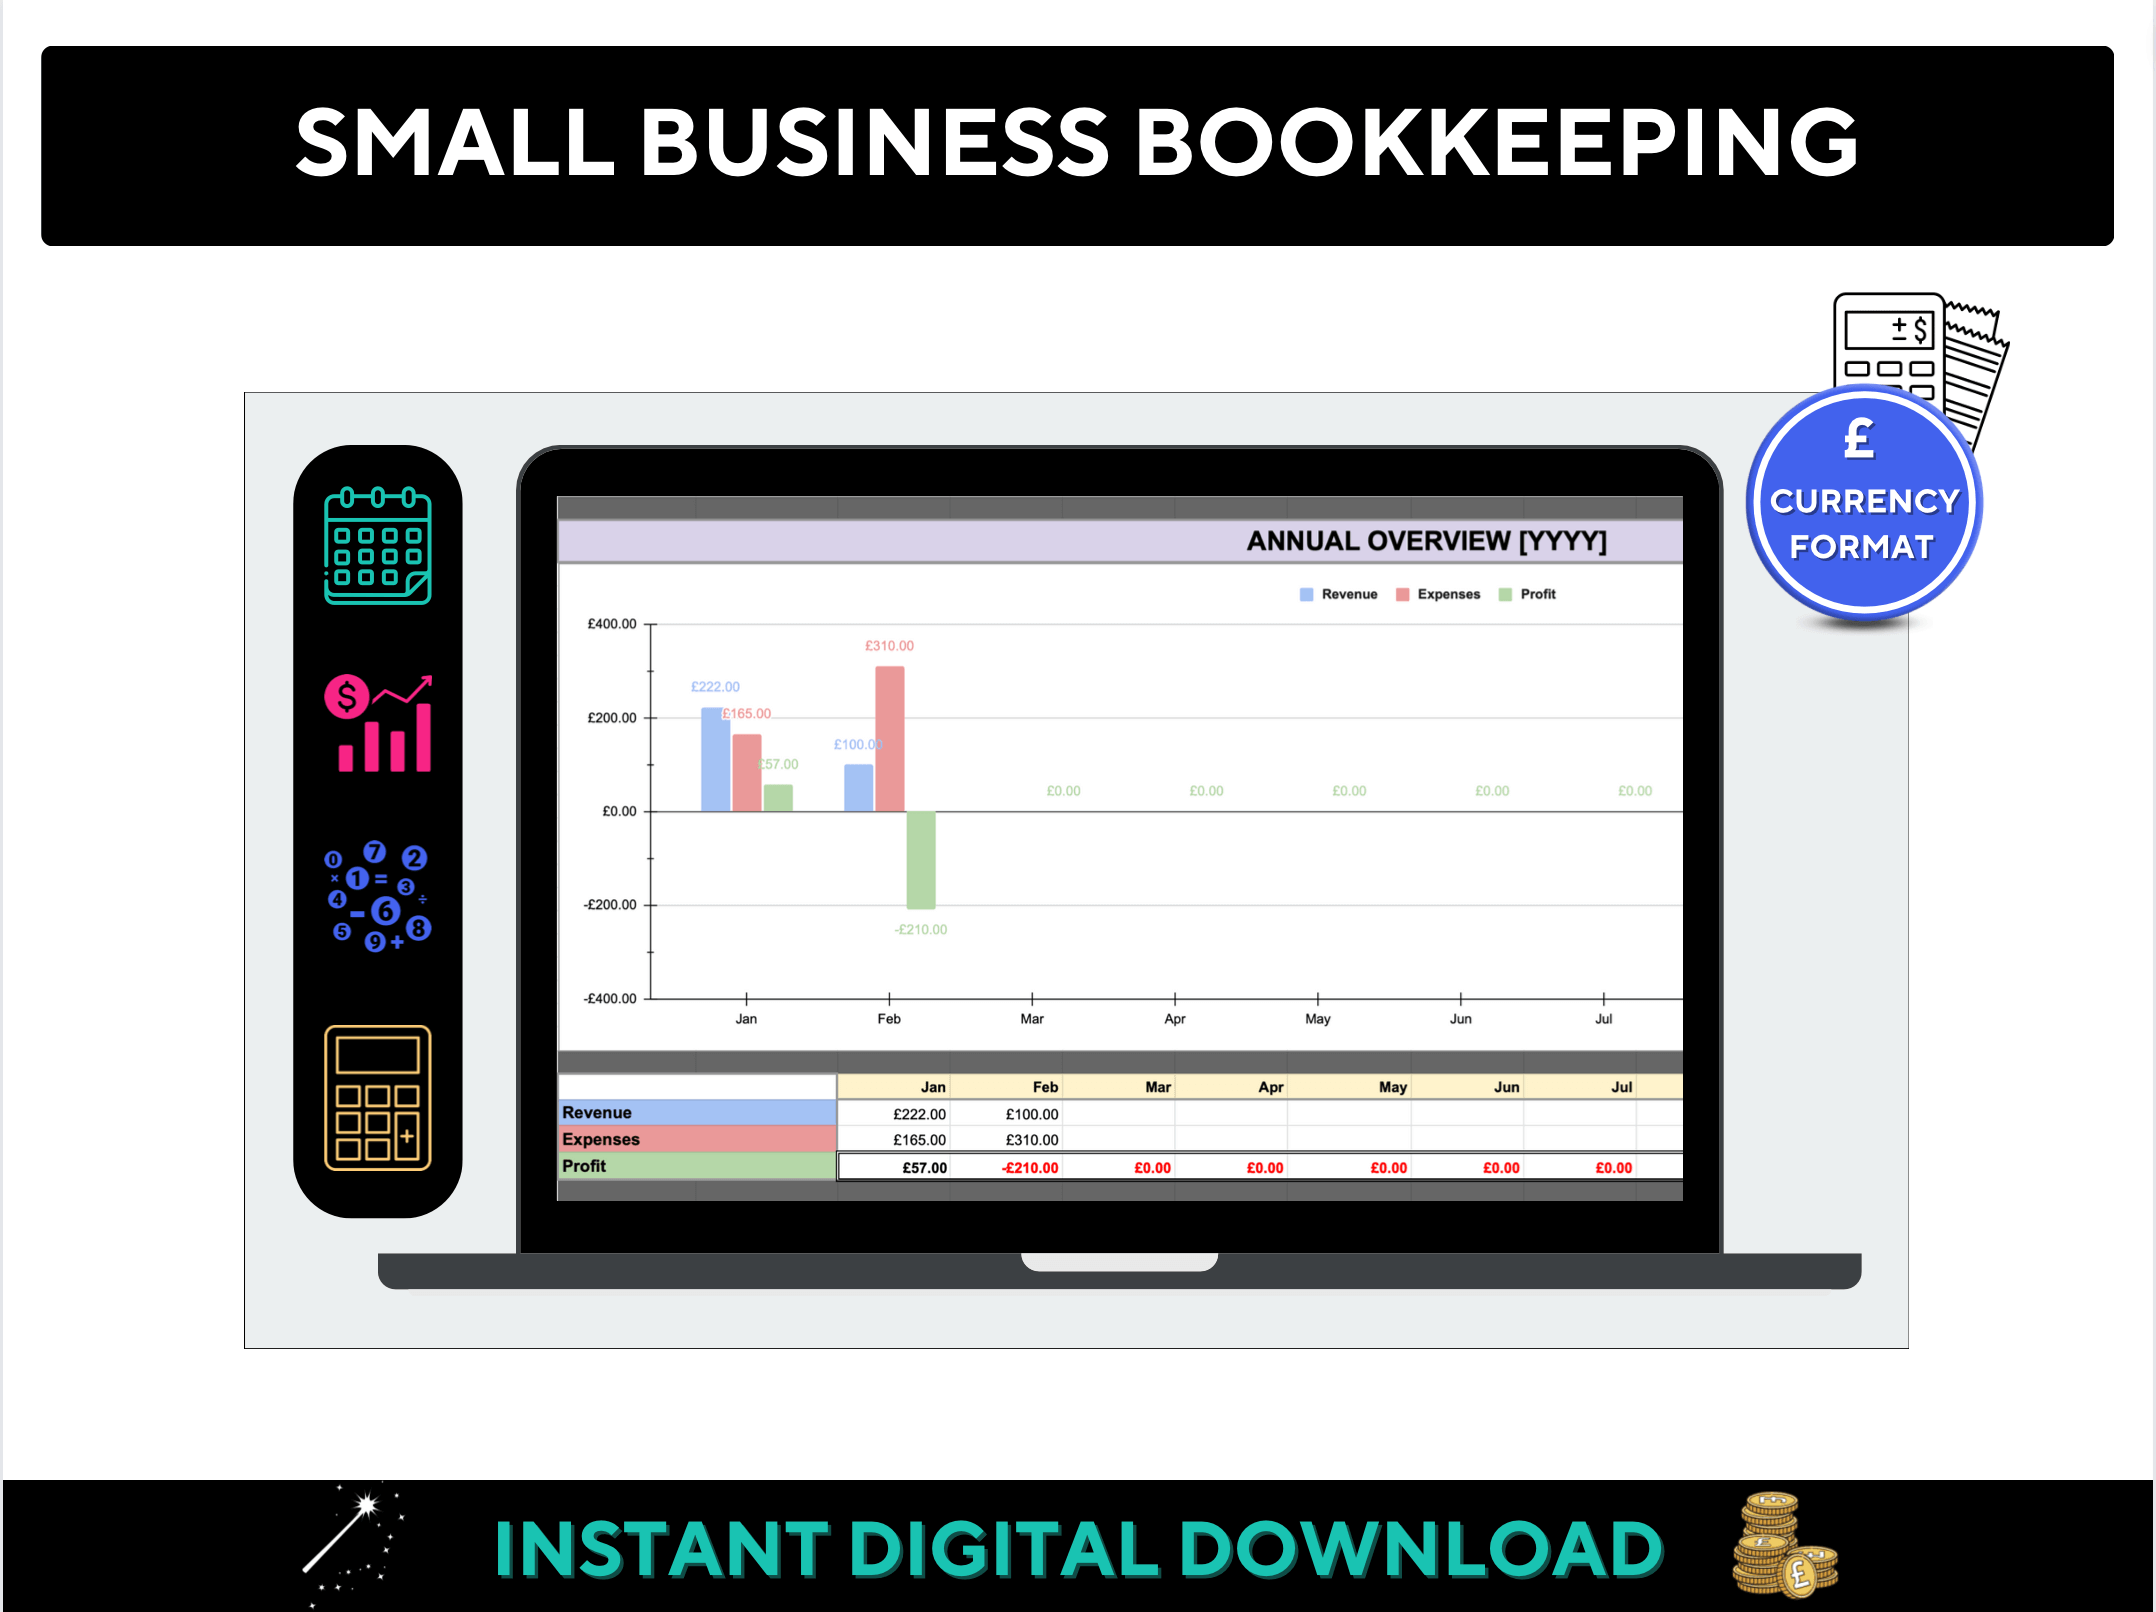 Shop - Small Business Bookkeeping Spreadsheet Pound Sterling Format